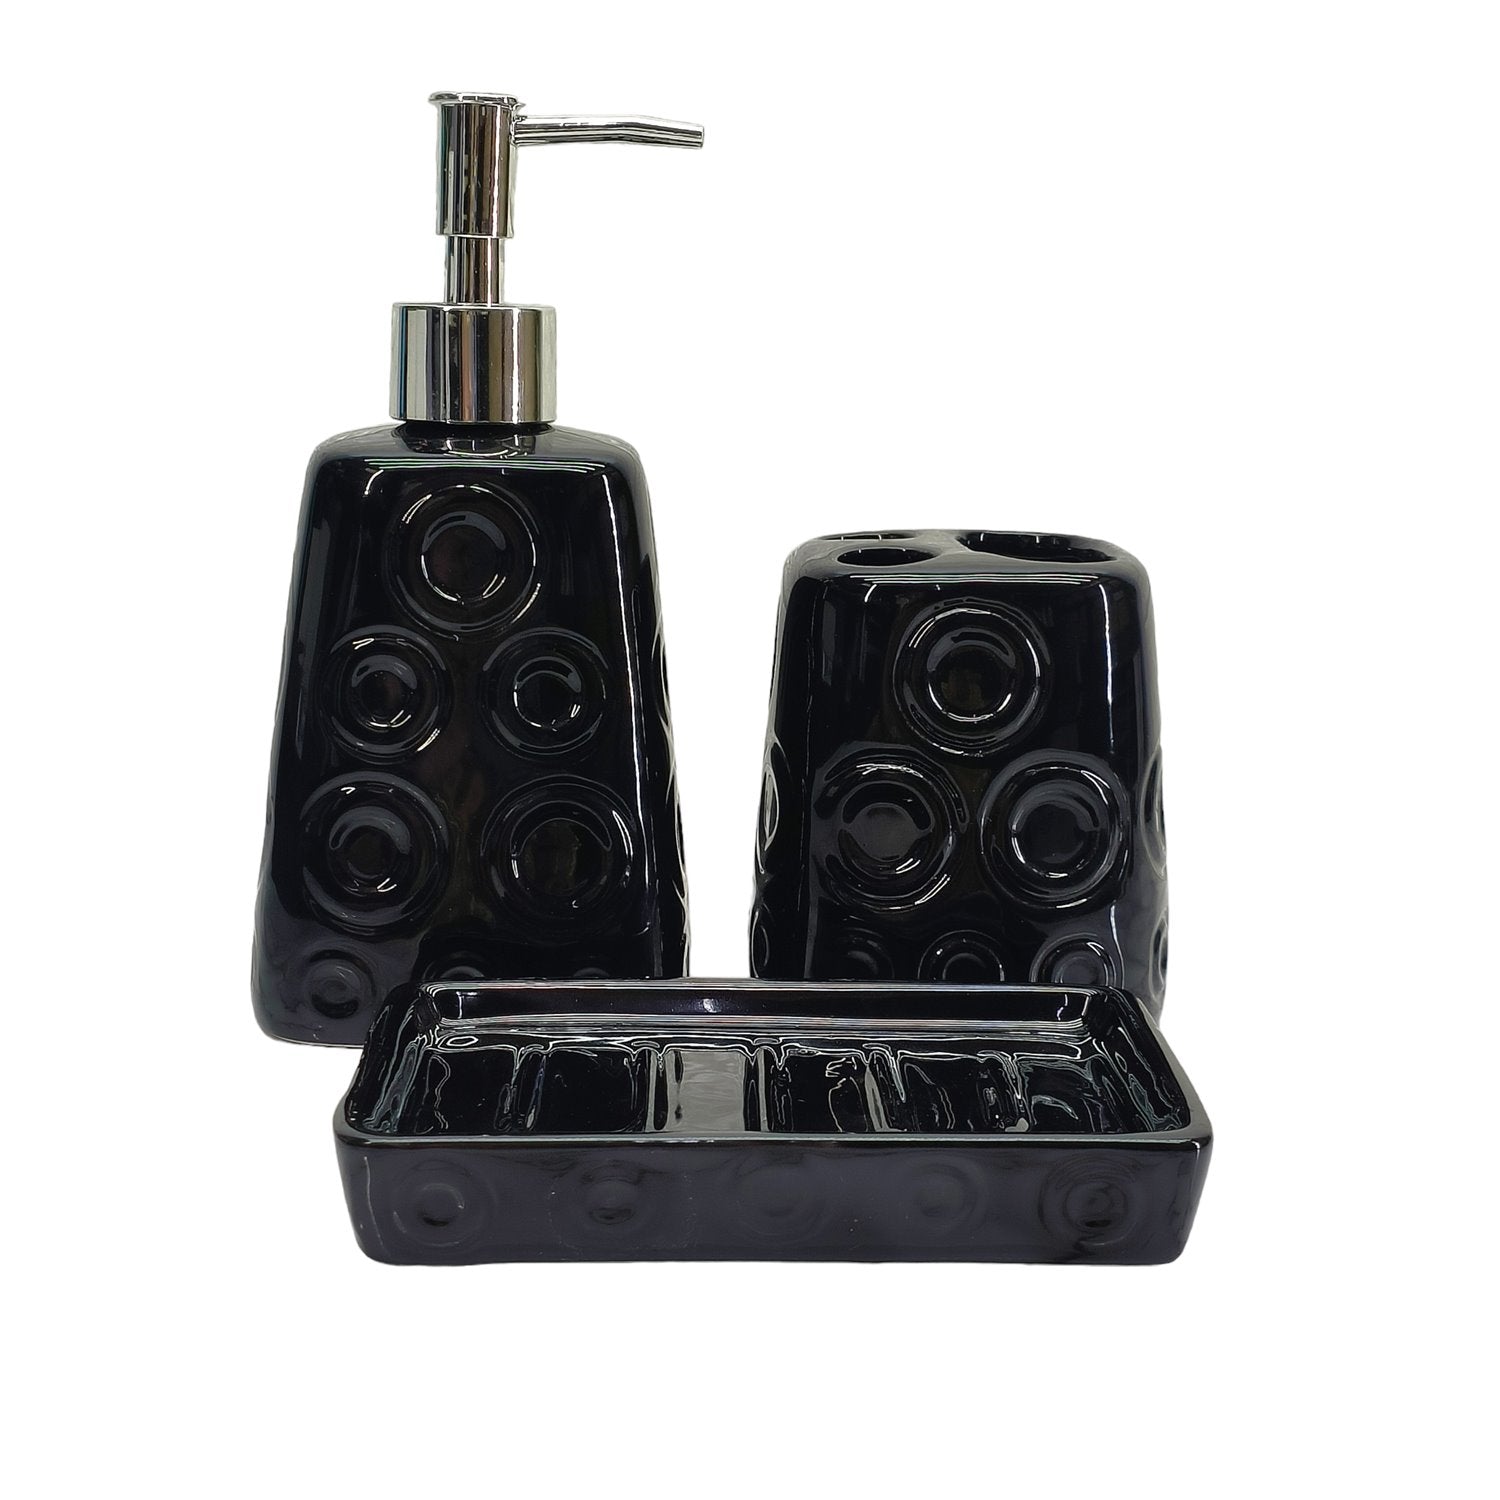 Ceramic Soap Dispenser Set with Toothbrush Holder and Soap Dish, Set of 3 Bathroom Accessories for Home (C3026)